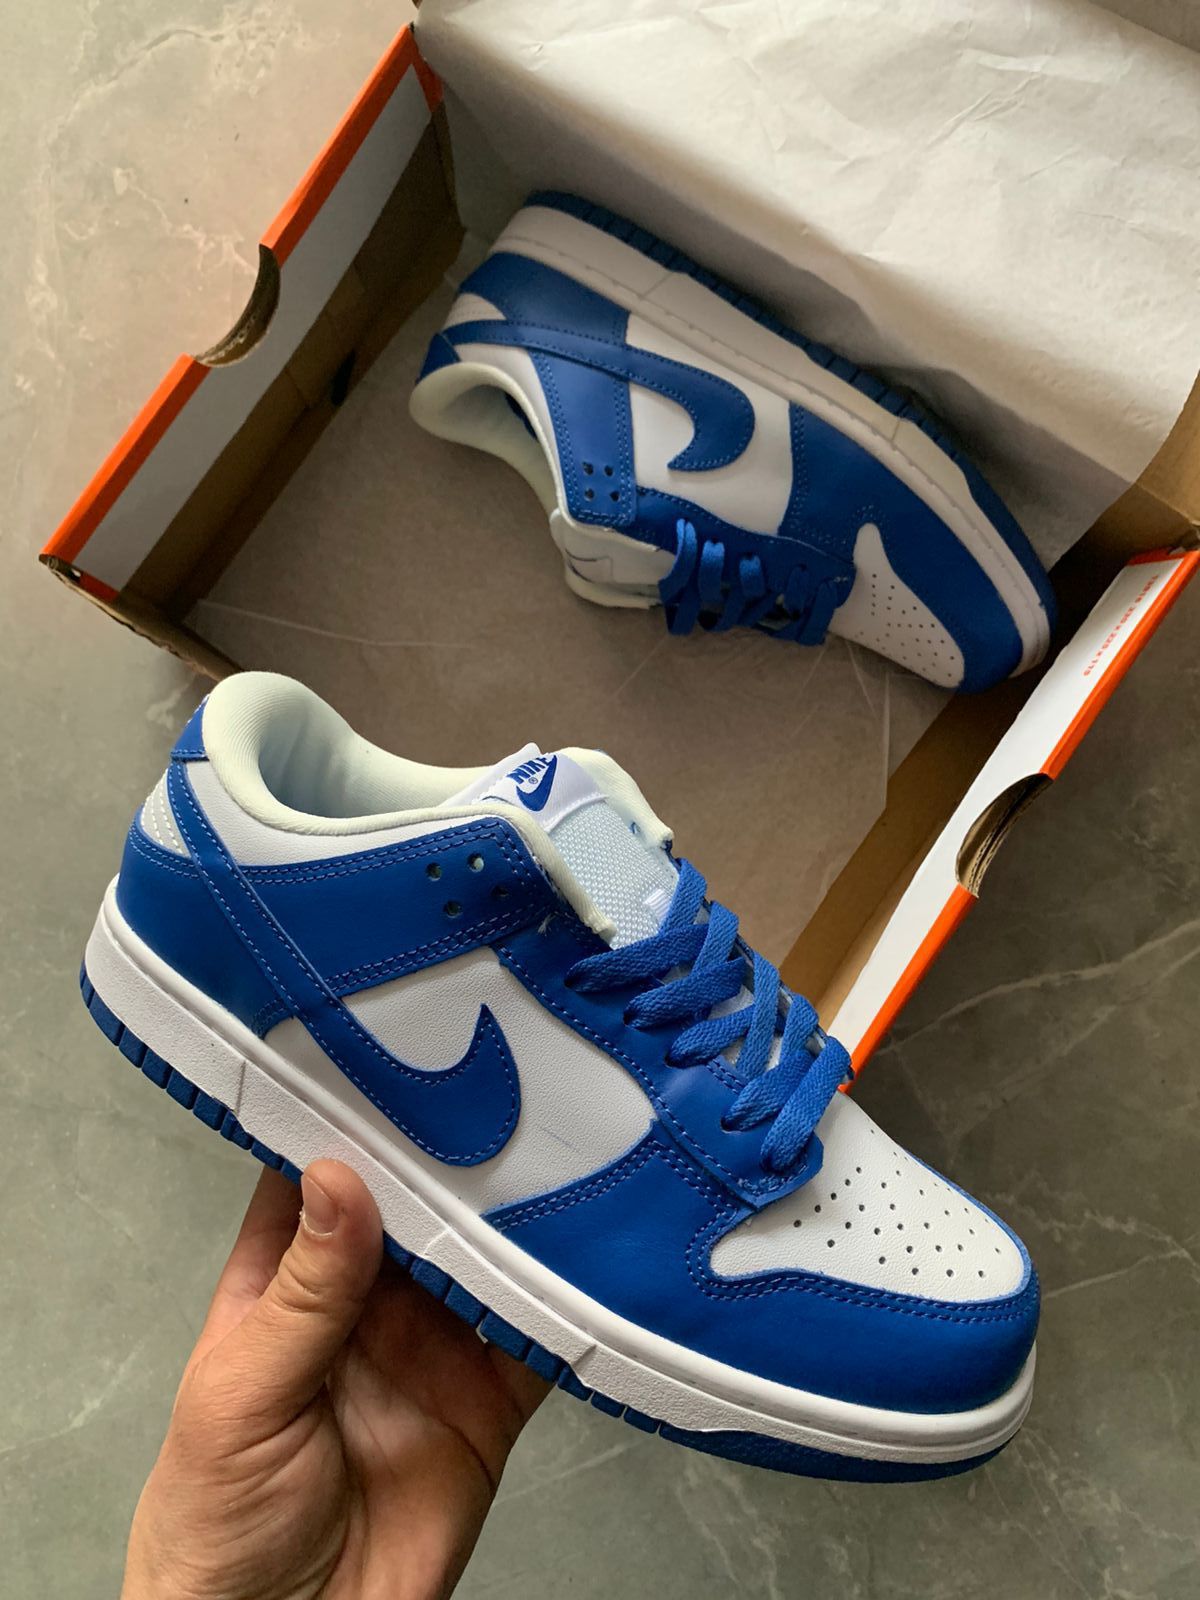 Blue Sb Dunk Leather Sneakers For Girls